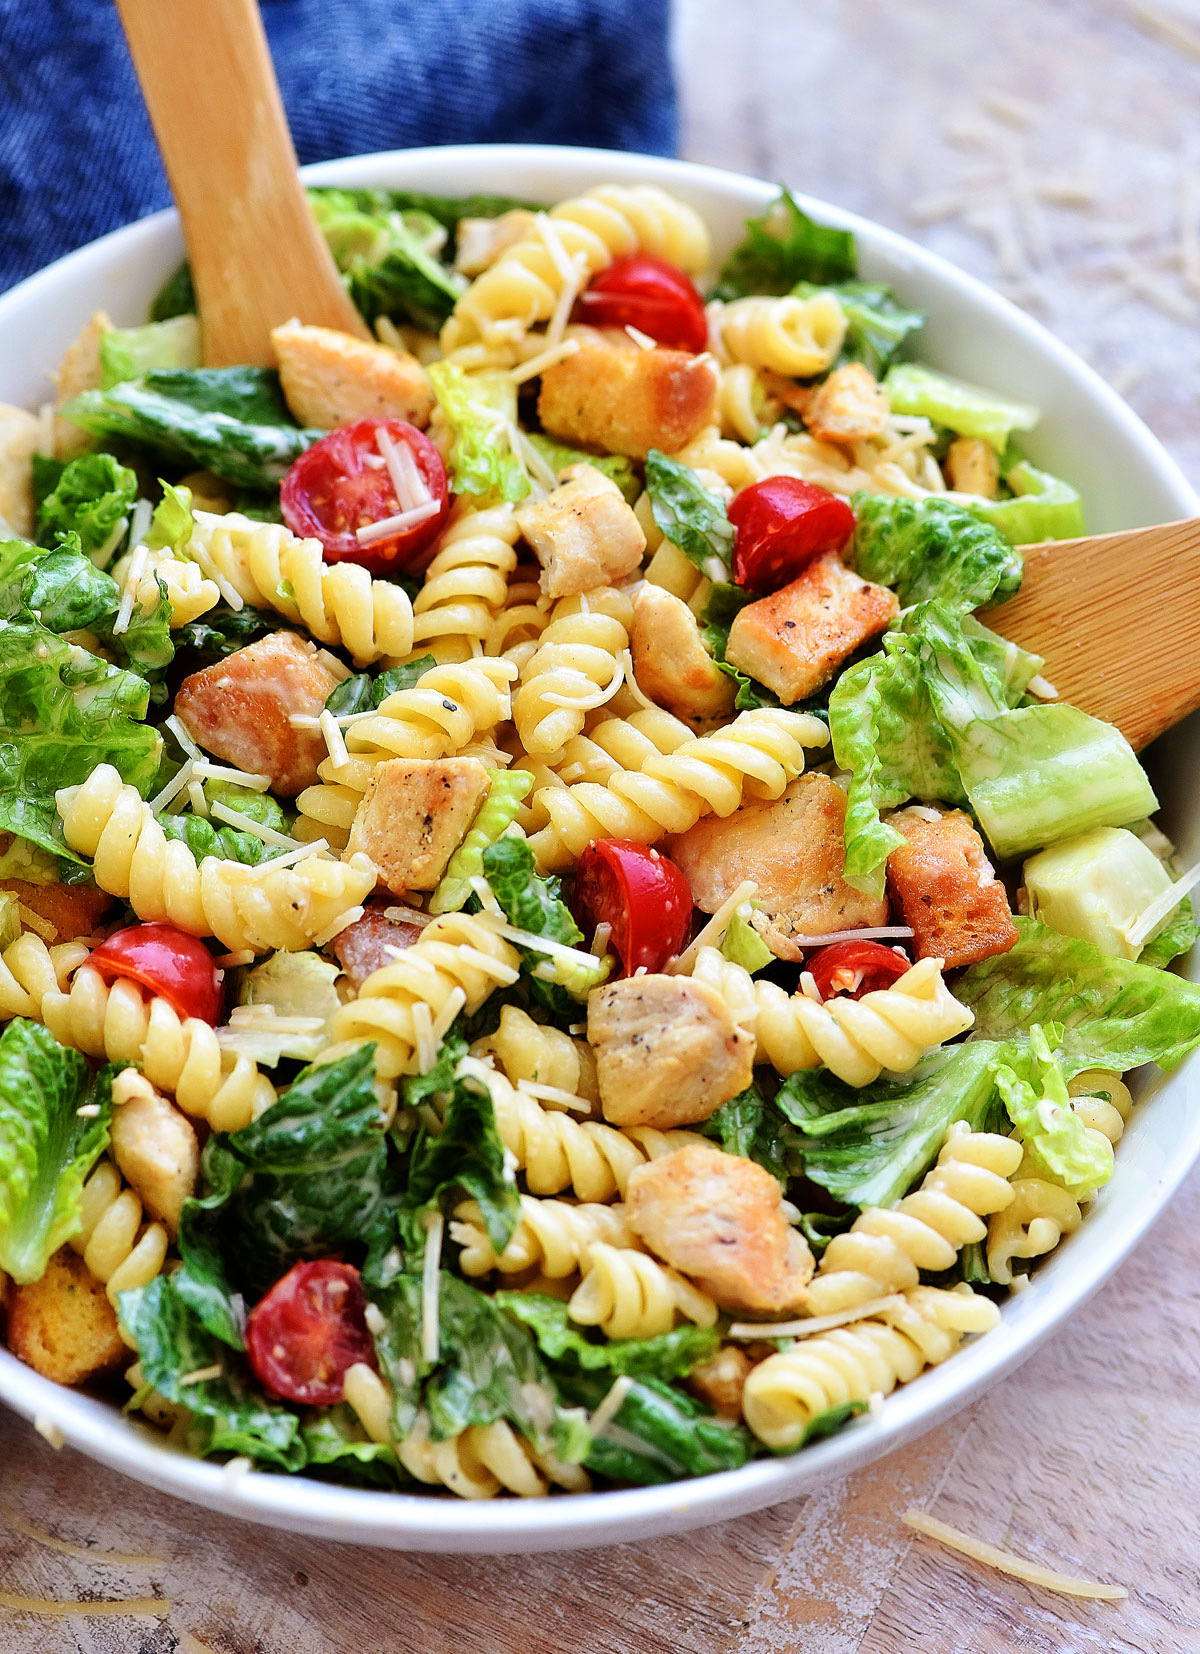 Chicken Caesar Pasta Salad is filled with grilled chicken, rotini pasta, croutons and tomatoes over a bed of romaine lettuce. Life-in-the-Lofthouse.com